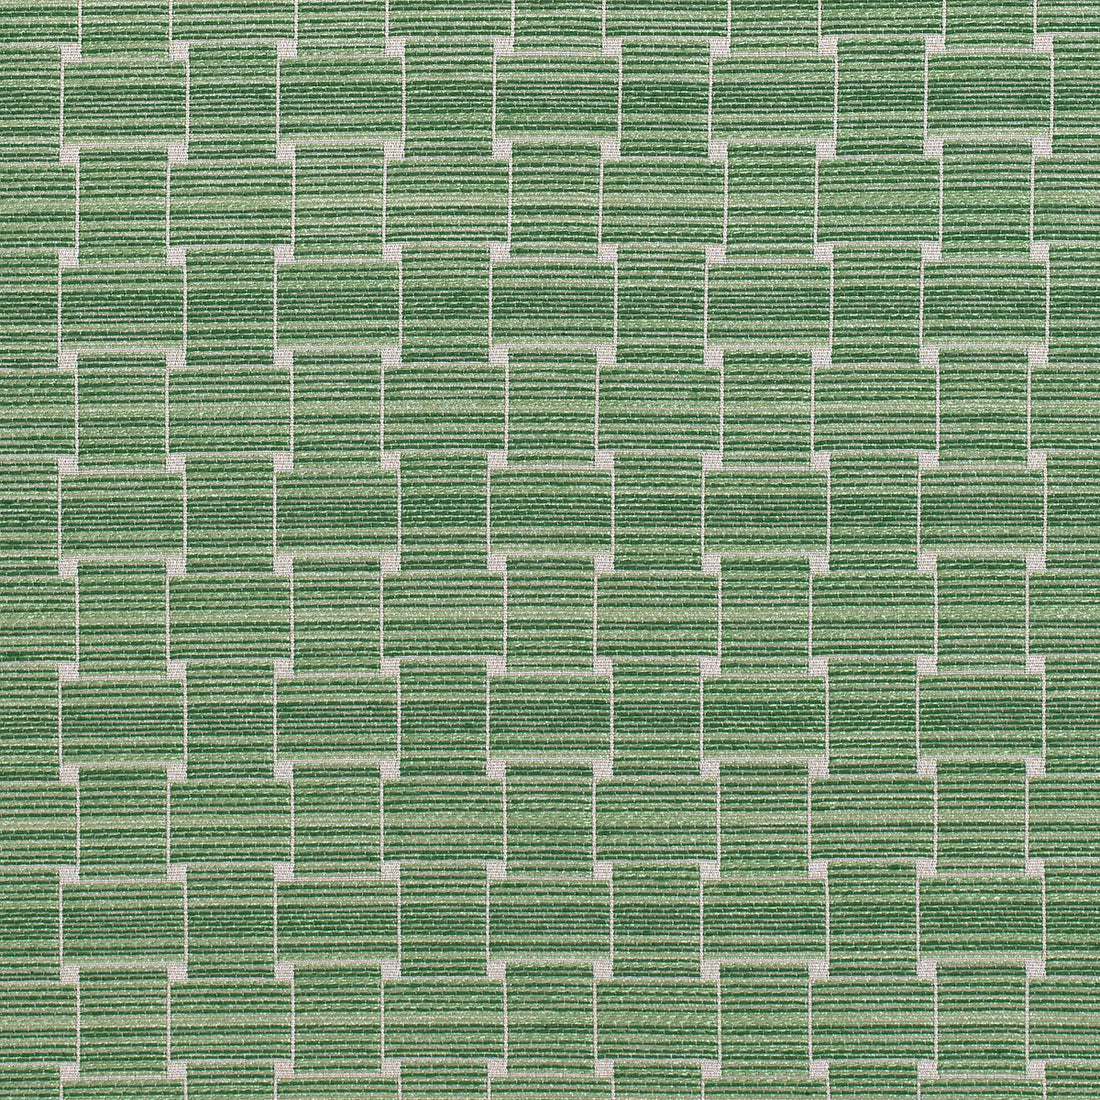 Beaumois Woven fabric in leaf color - pattern 8020108.3.0 - by Brunschwig &amp; Fils in the Granville Weaves collection